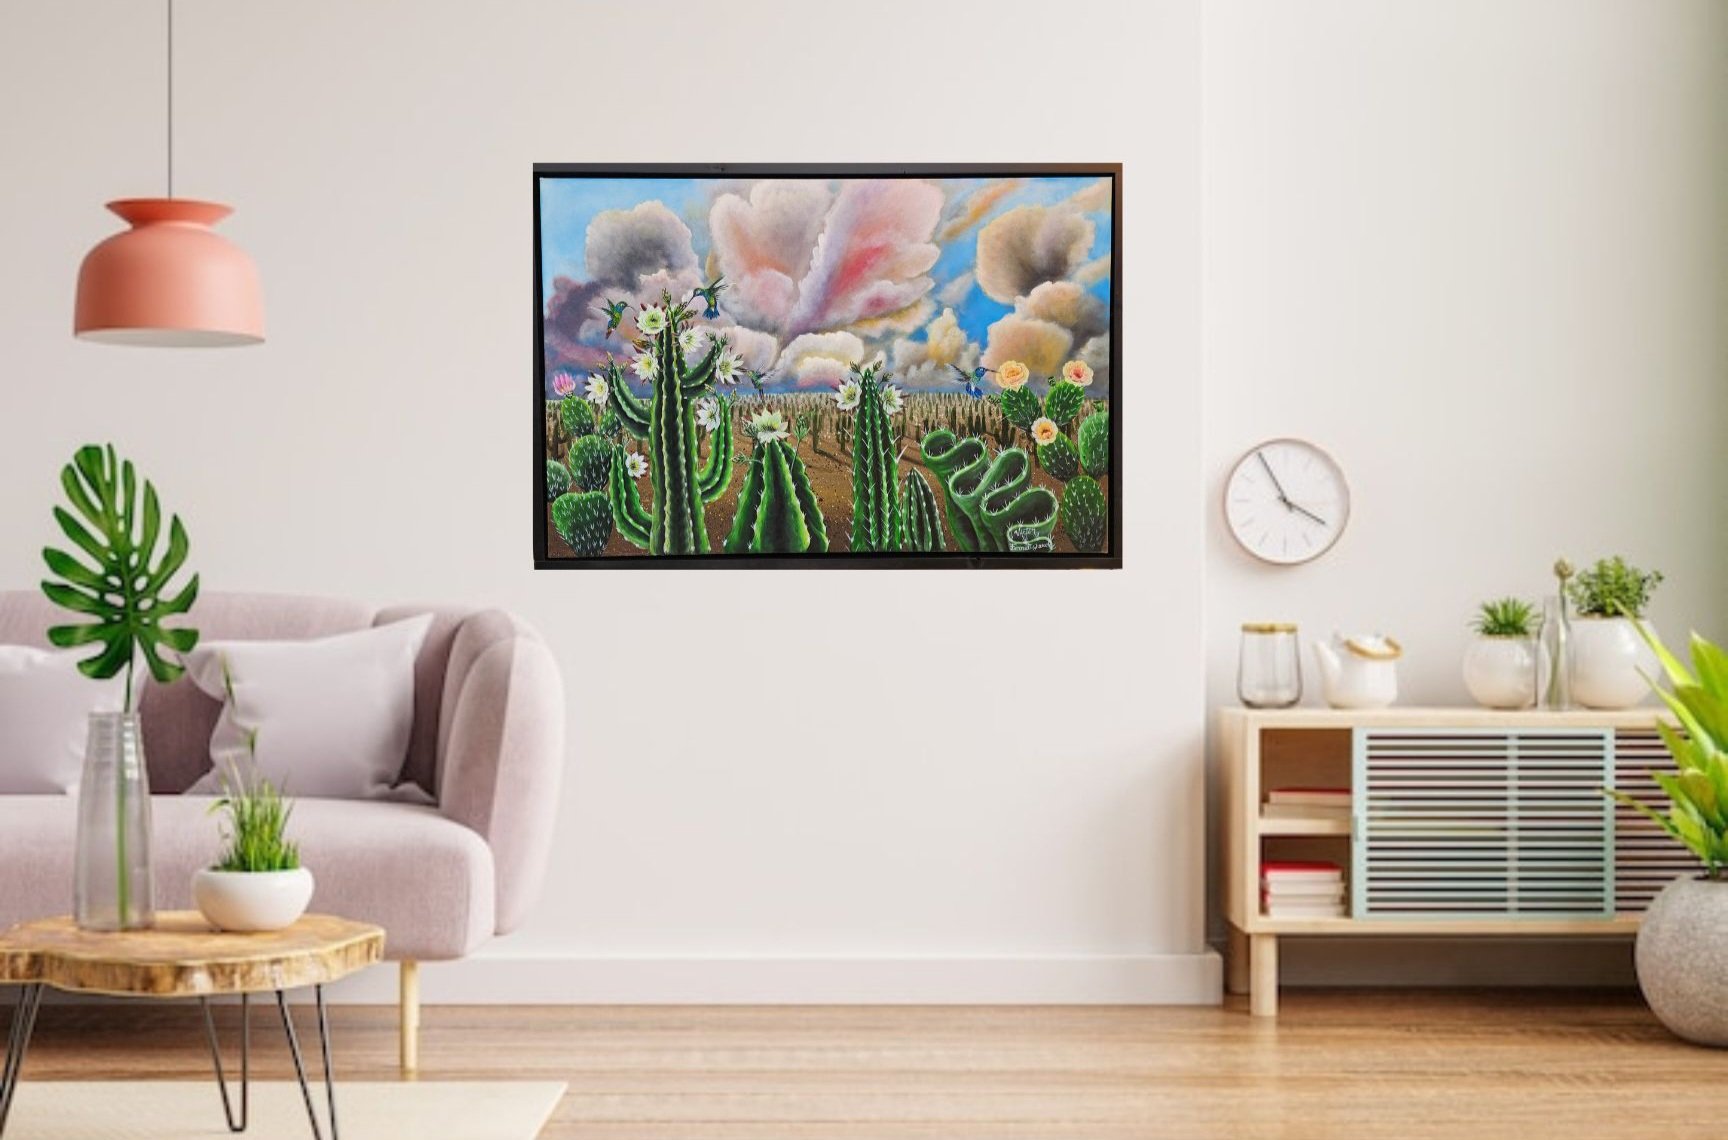 Acrylic paiting on canvas representing a surrealistic cacti garden in the desert with an ethereal cloudscape. The frame was handmade and painted.